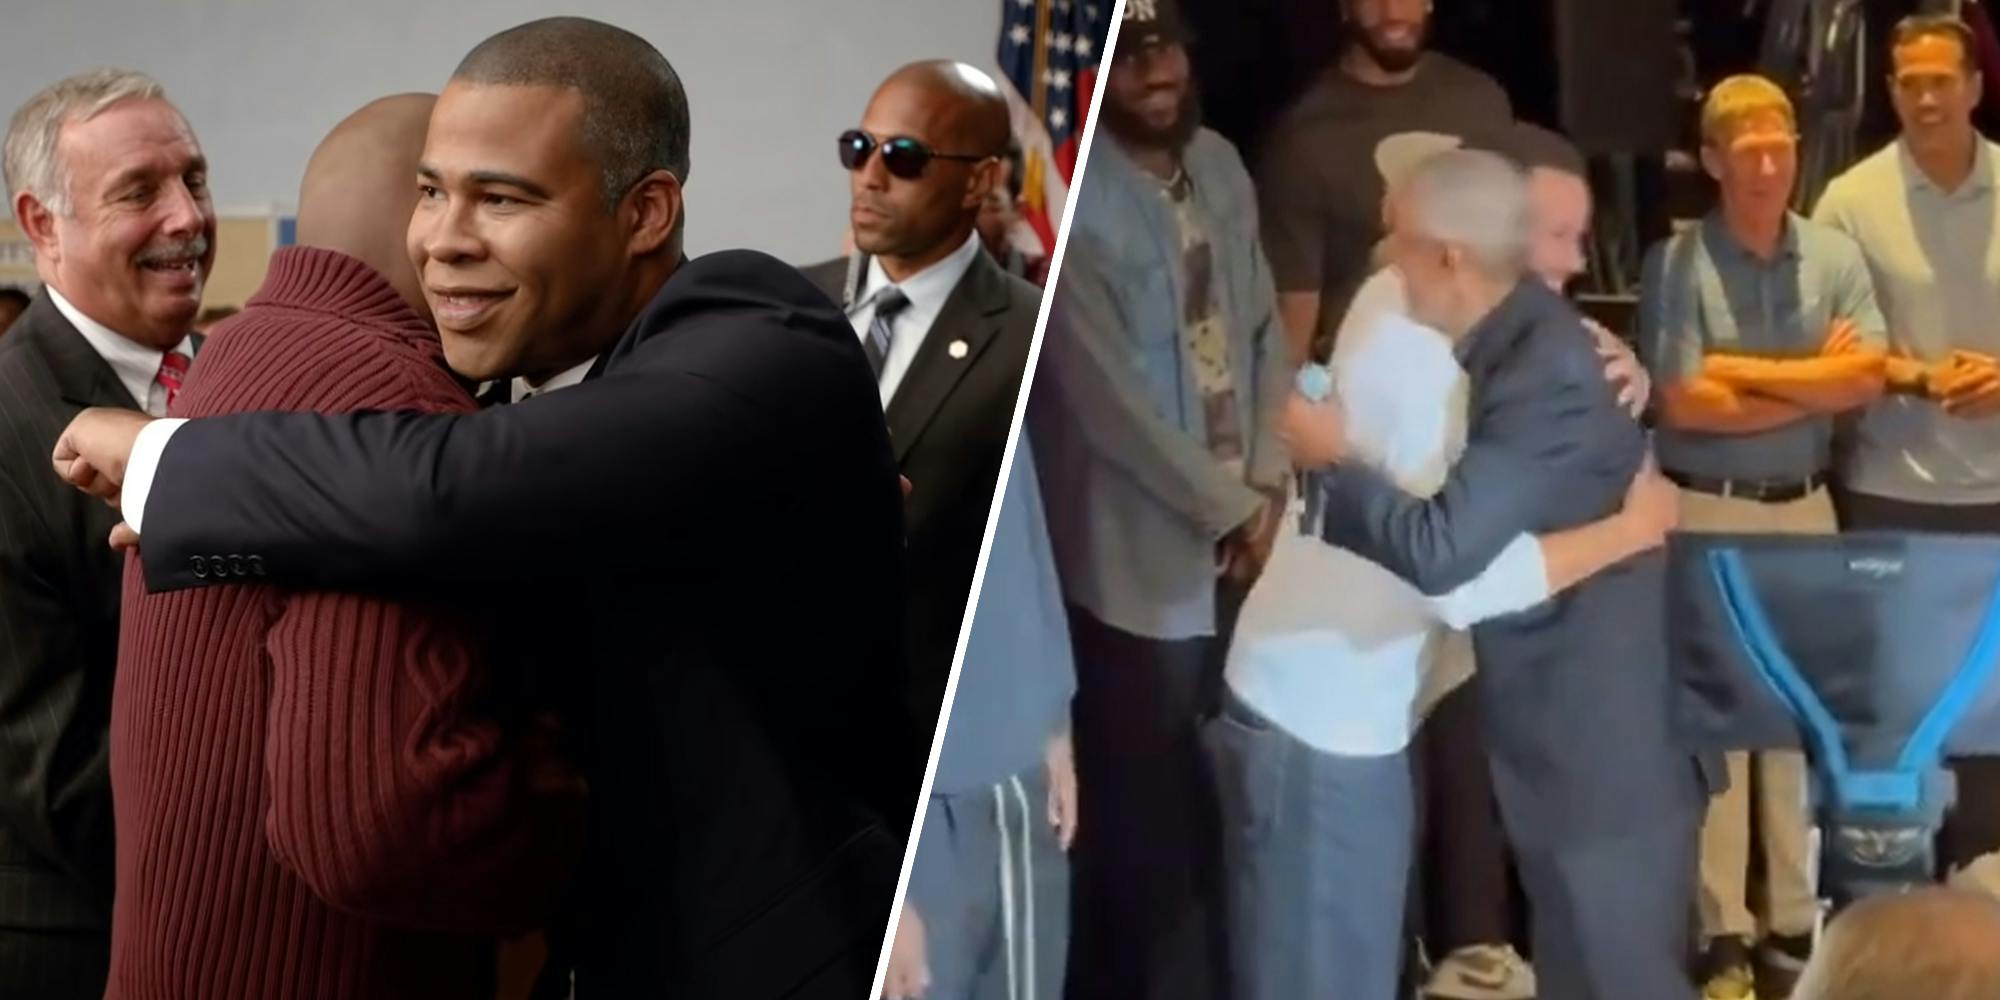 Obama greeting Team USA is being compared to "Key and Peele" sketch